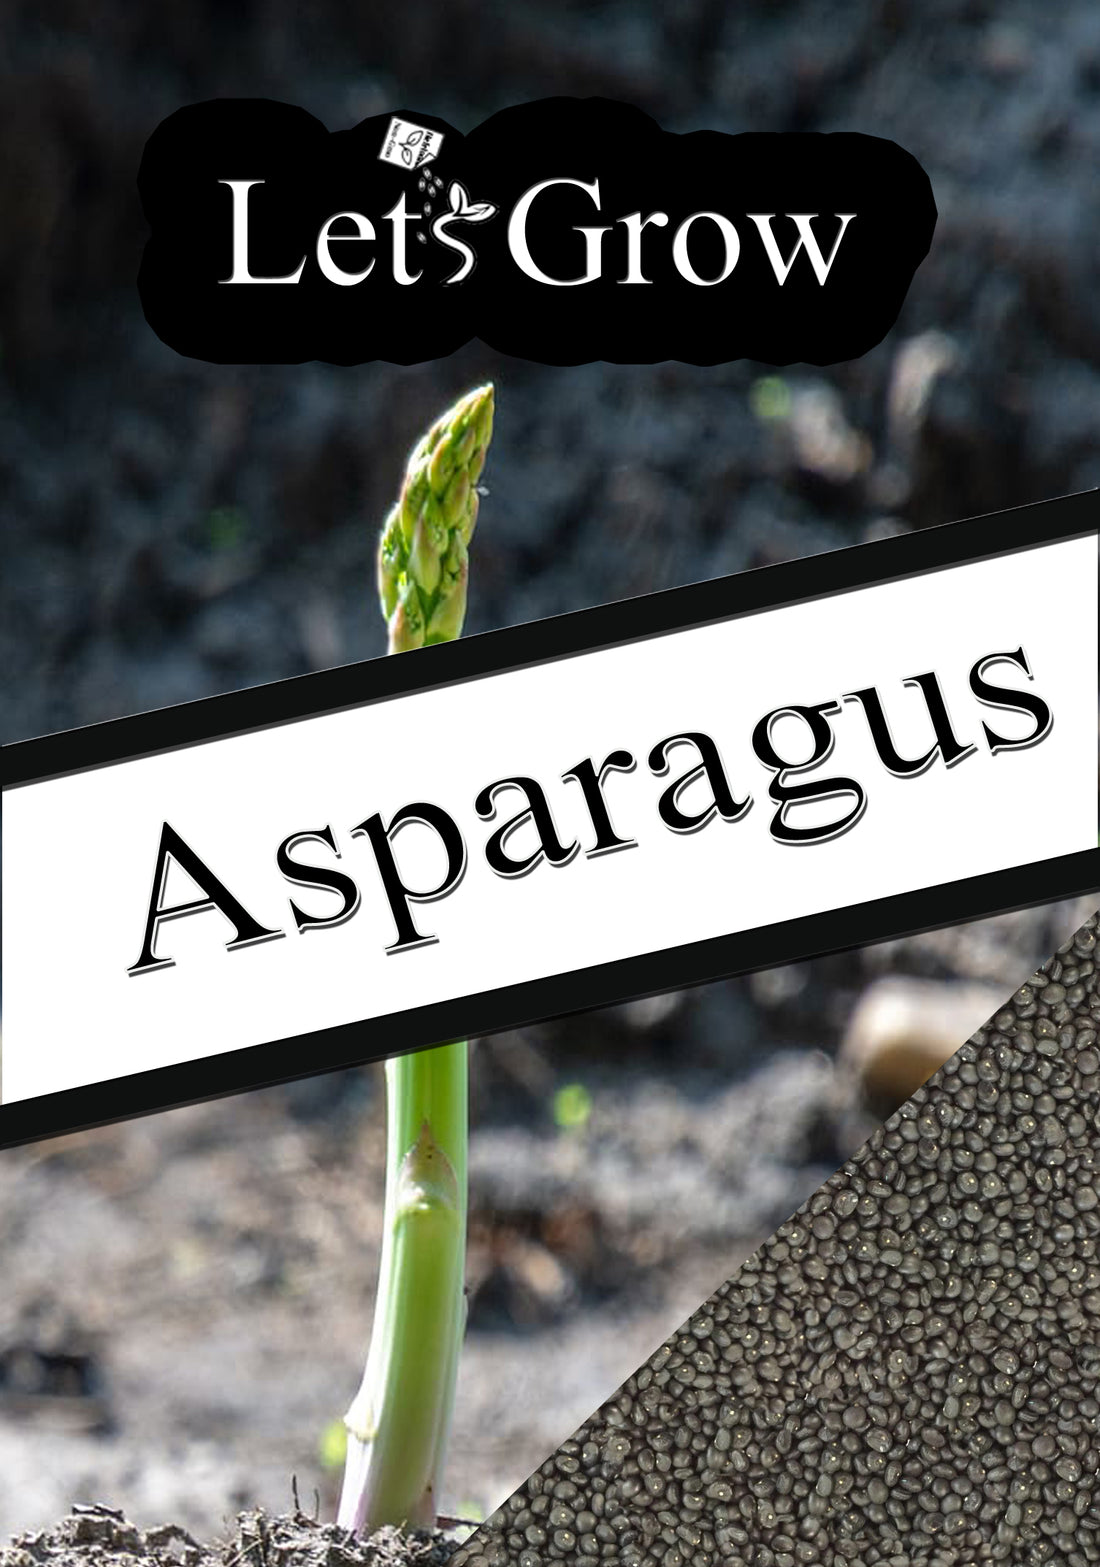 A comprehensive guide to growing asparagus from seed